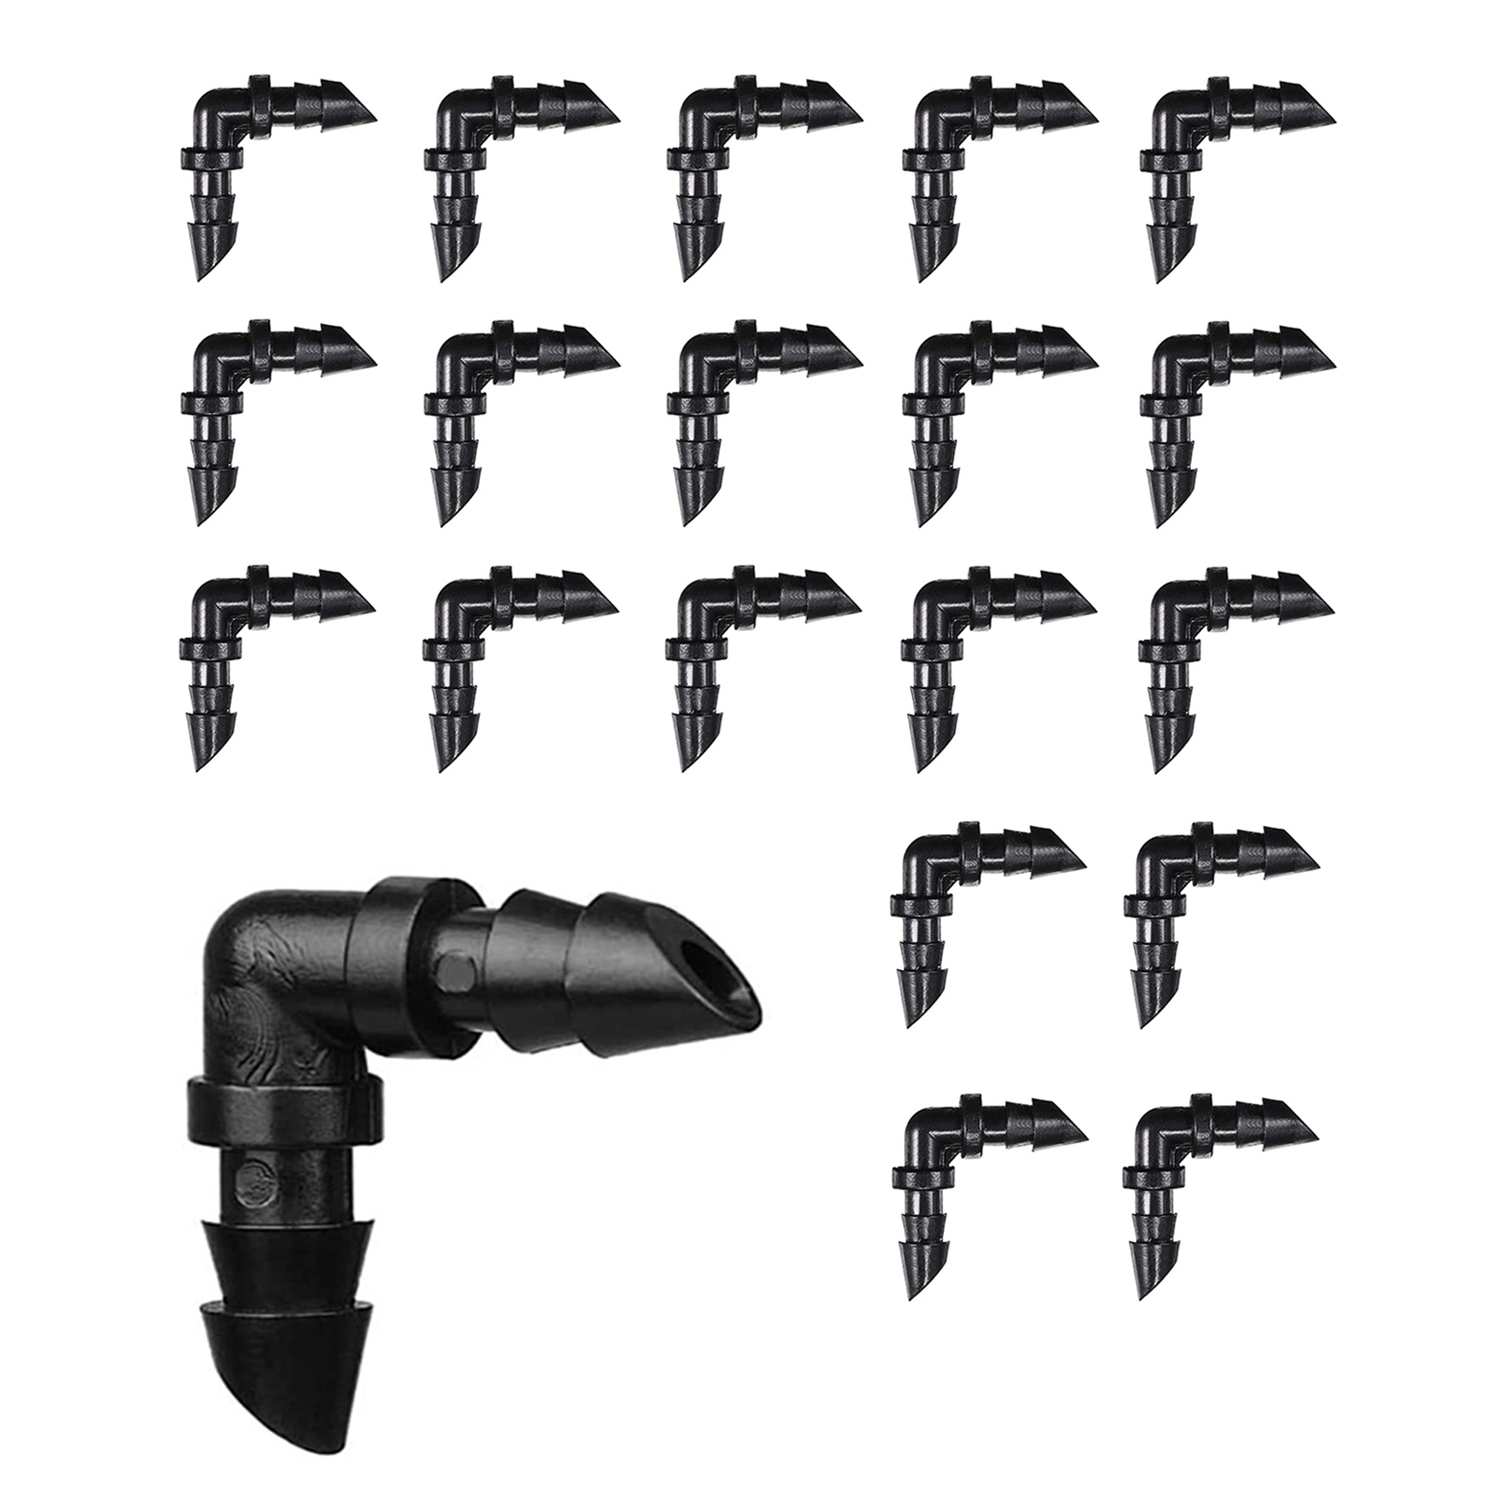 Rain USA Made - 1/4 Inch Barbed Elbow Connector Fitting 100 Pack Drip Irrigation/Hydroponics Connector Fitting Garden Watering 